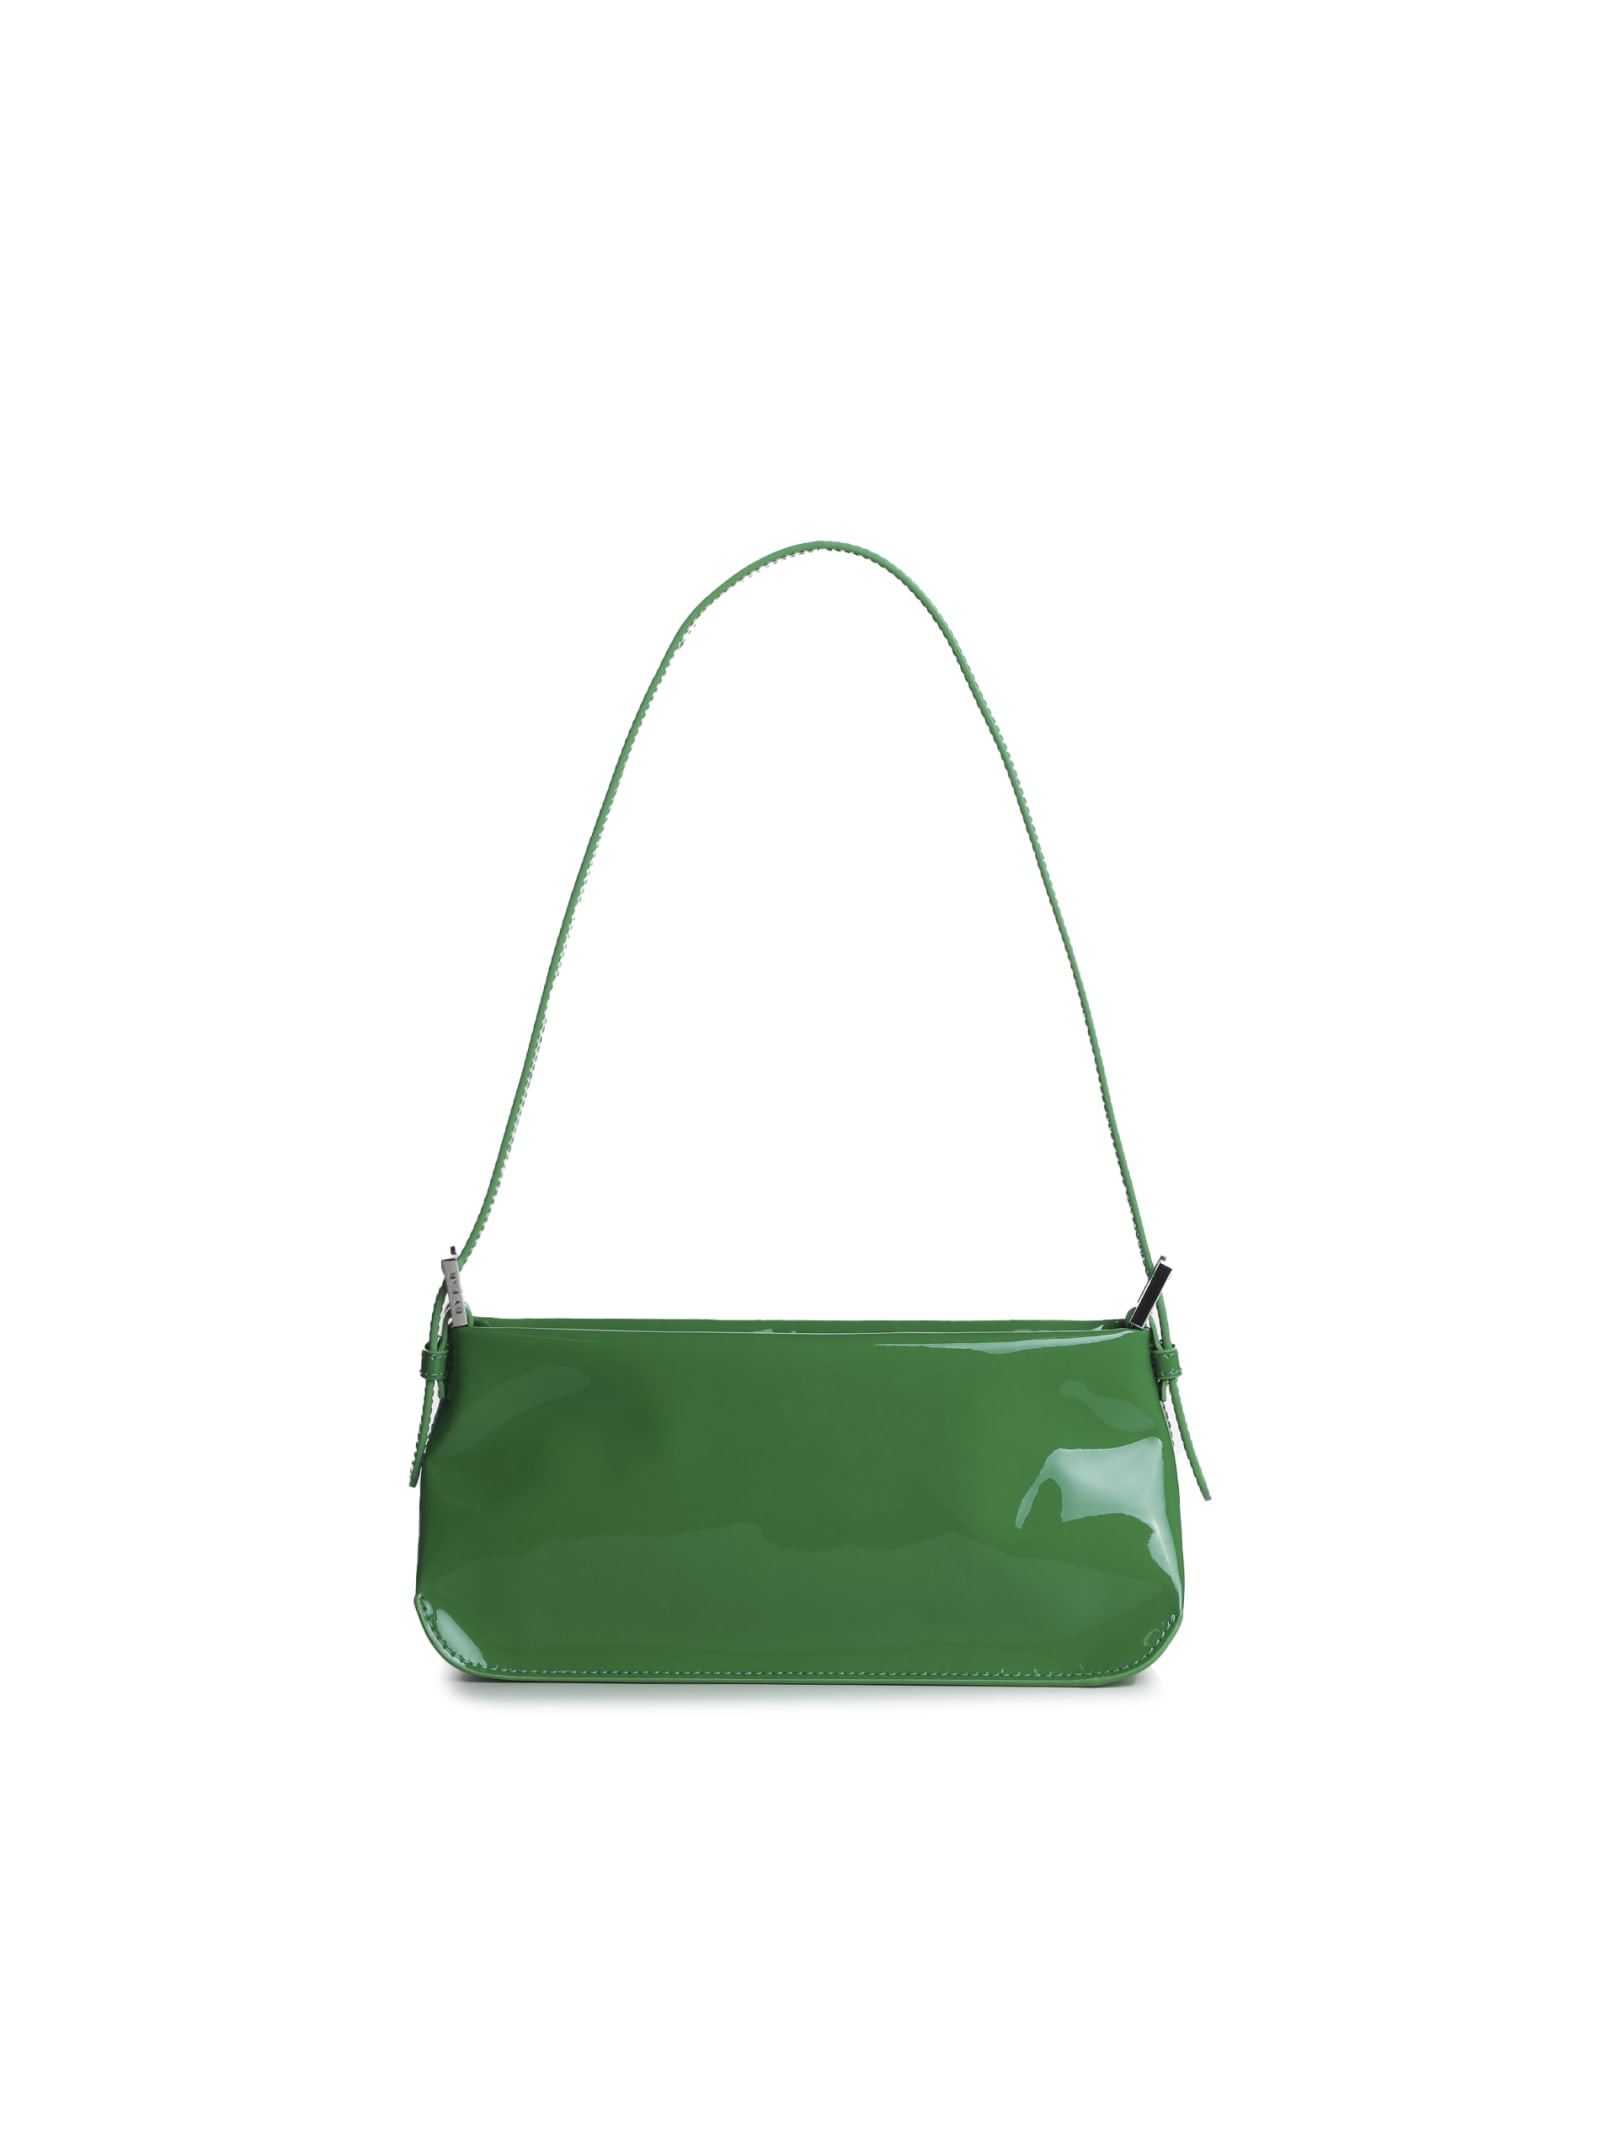 BY FAR Dulce Shoulder Bag In Patent Leather